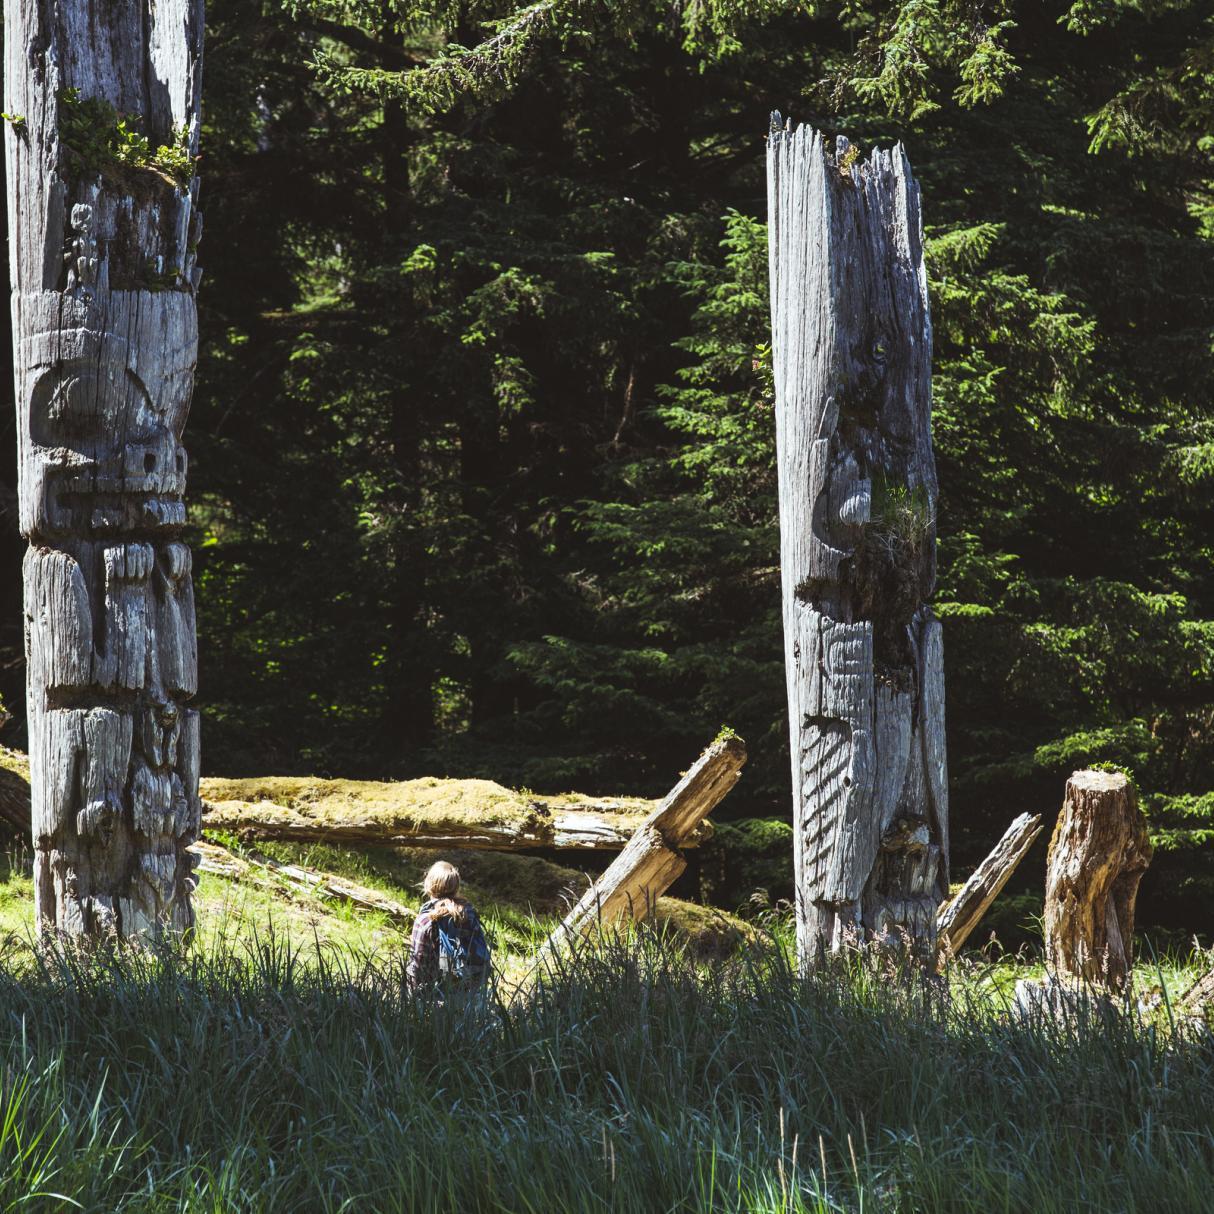 A traveller stands at the base of two totem poles in a forest